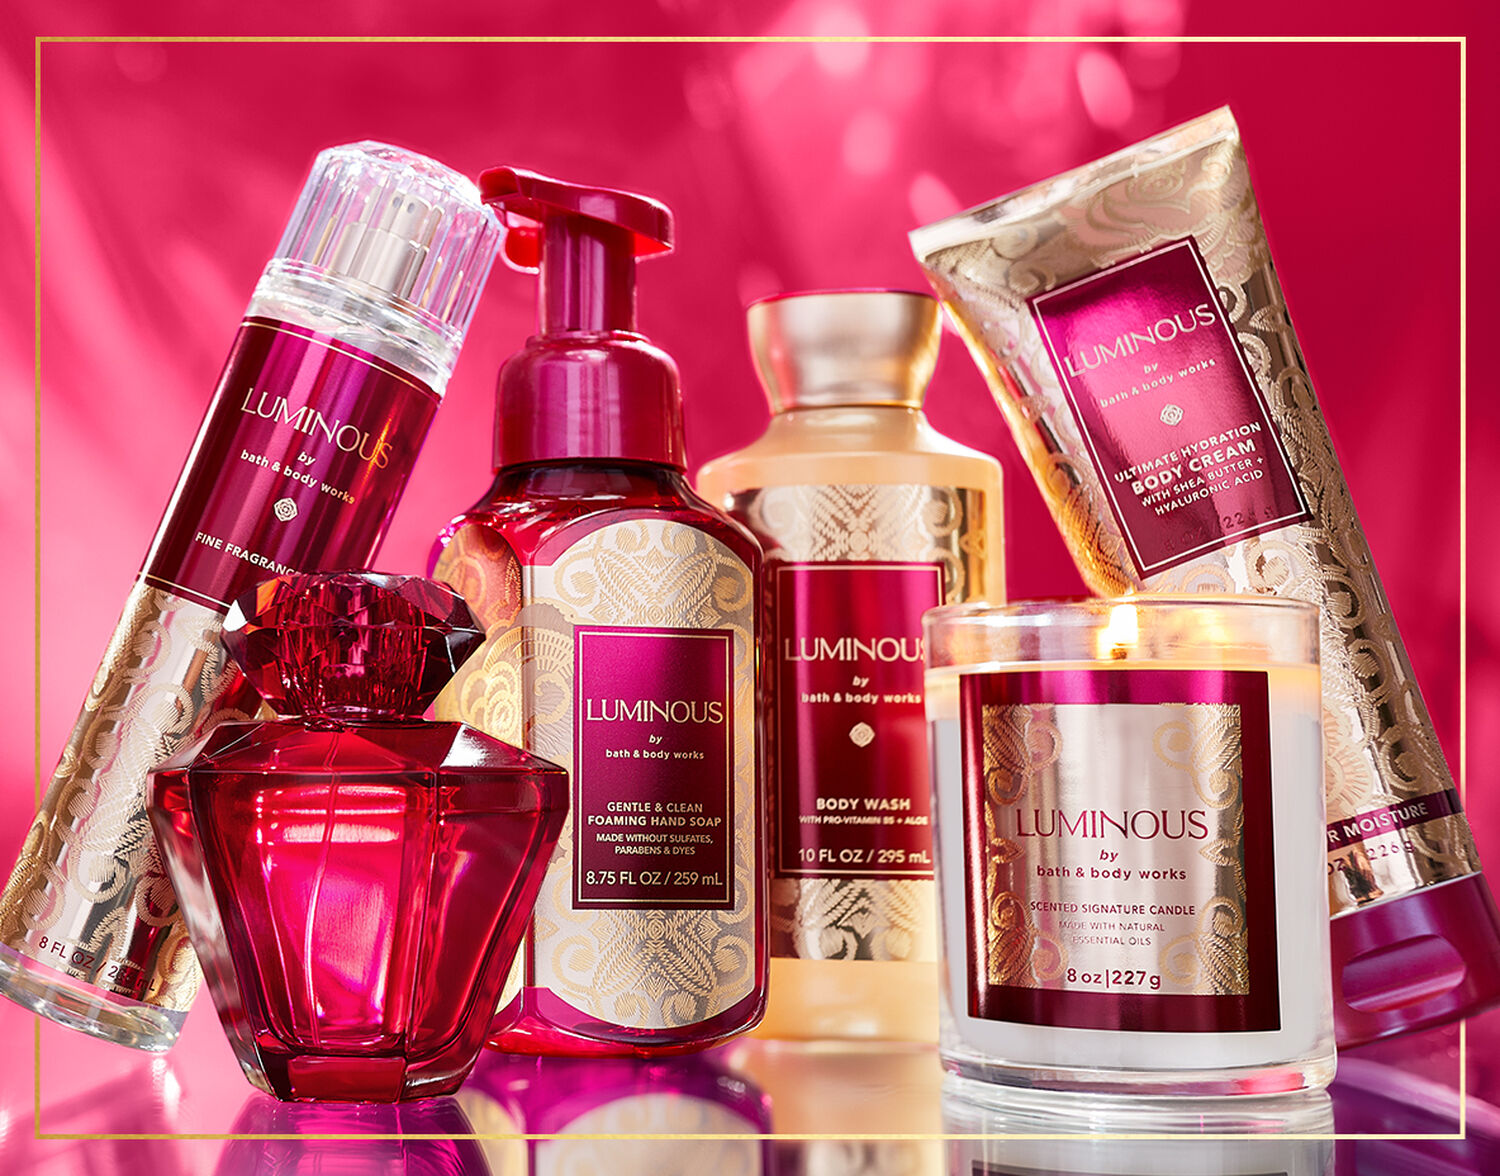 Let your radiance shine . Luxe fragrance notes for your skin and your space.